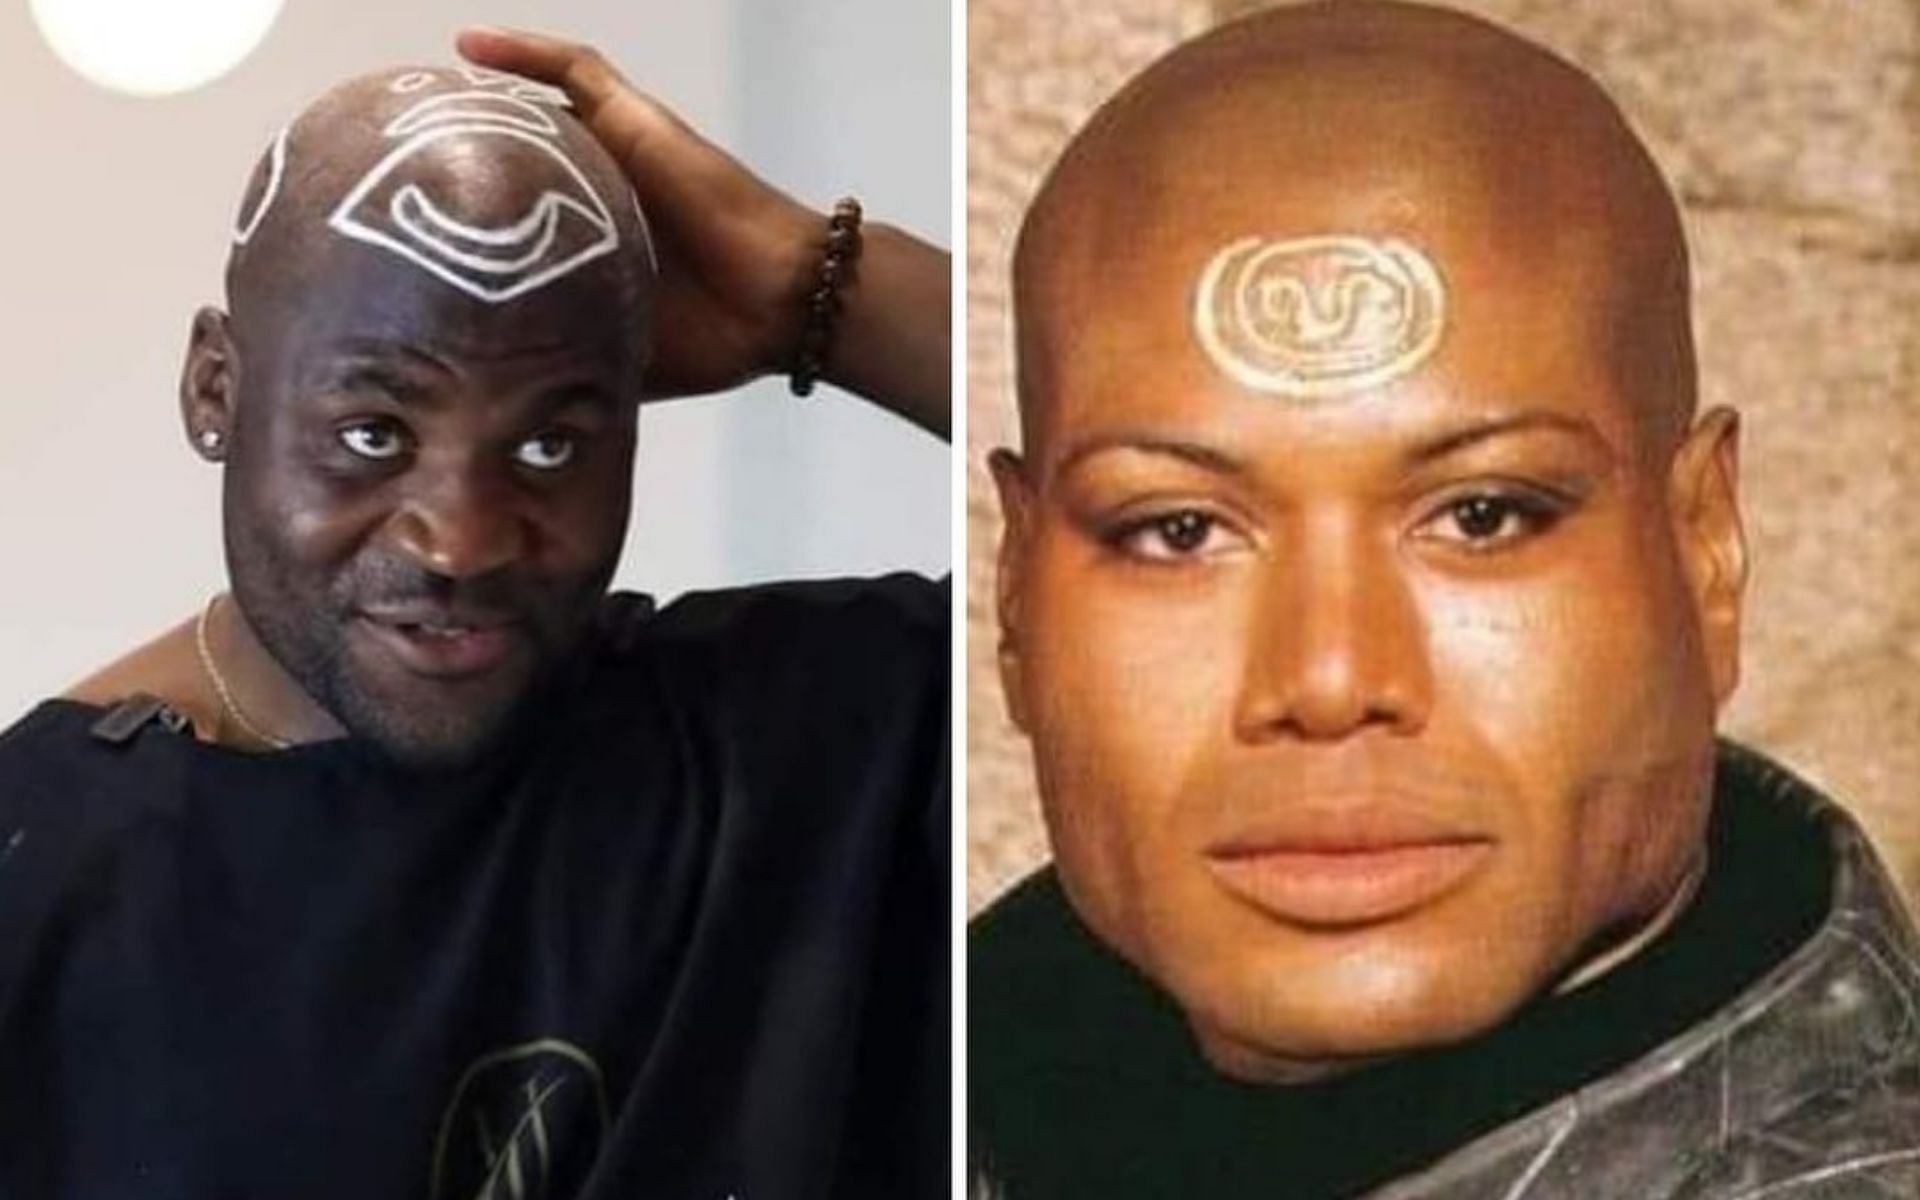 Francis Ngannou (left) compared his look to Teal&#039;c from Stargate SG-1 [Pic credits: @francisngannou Instagram]